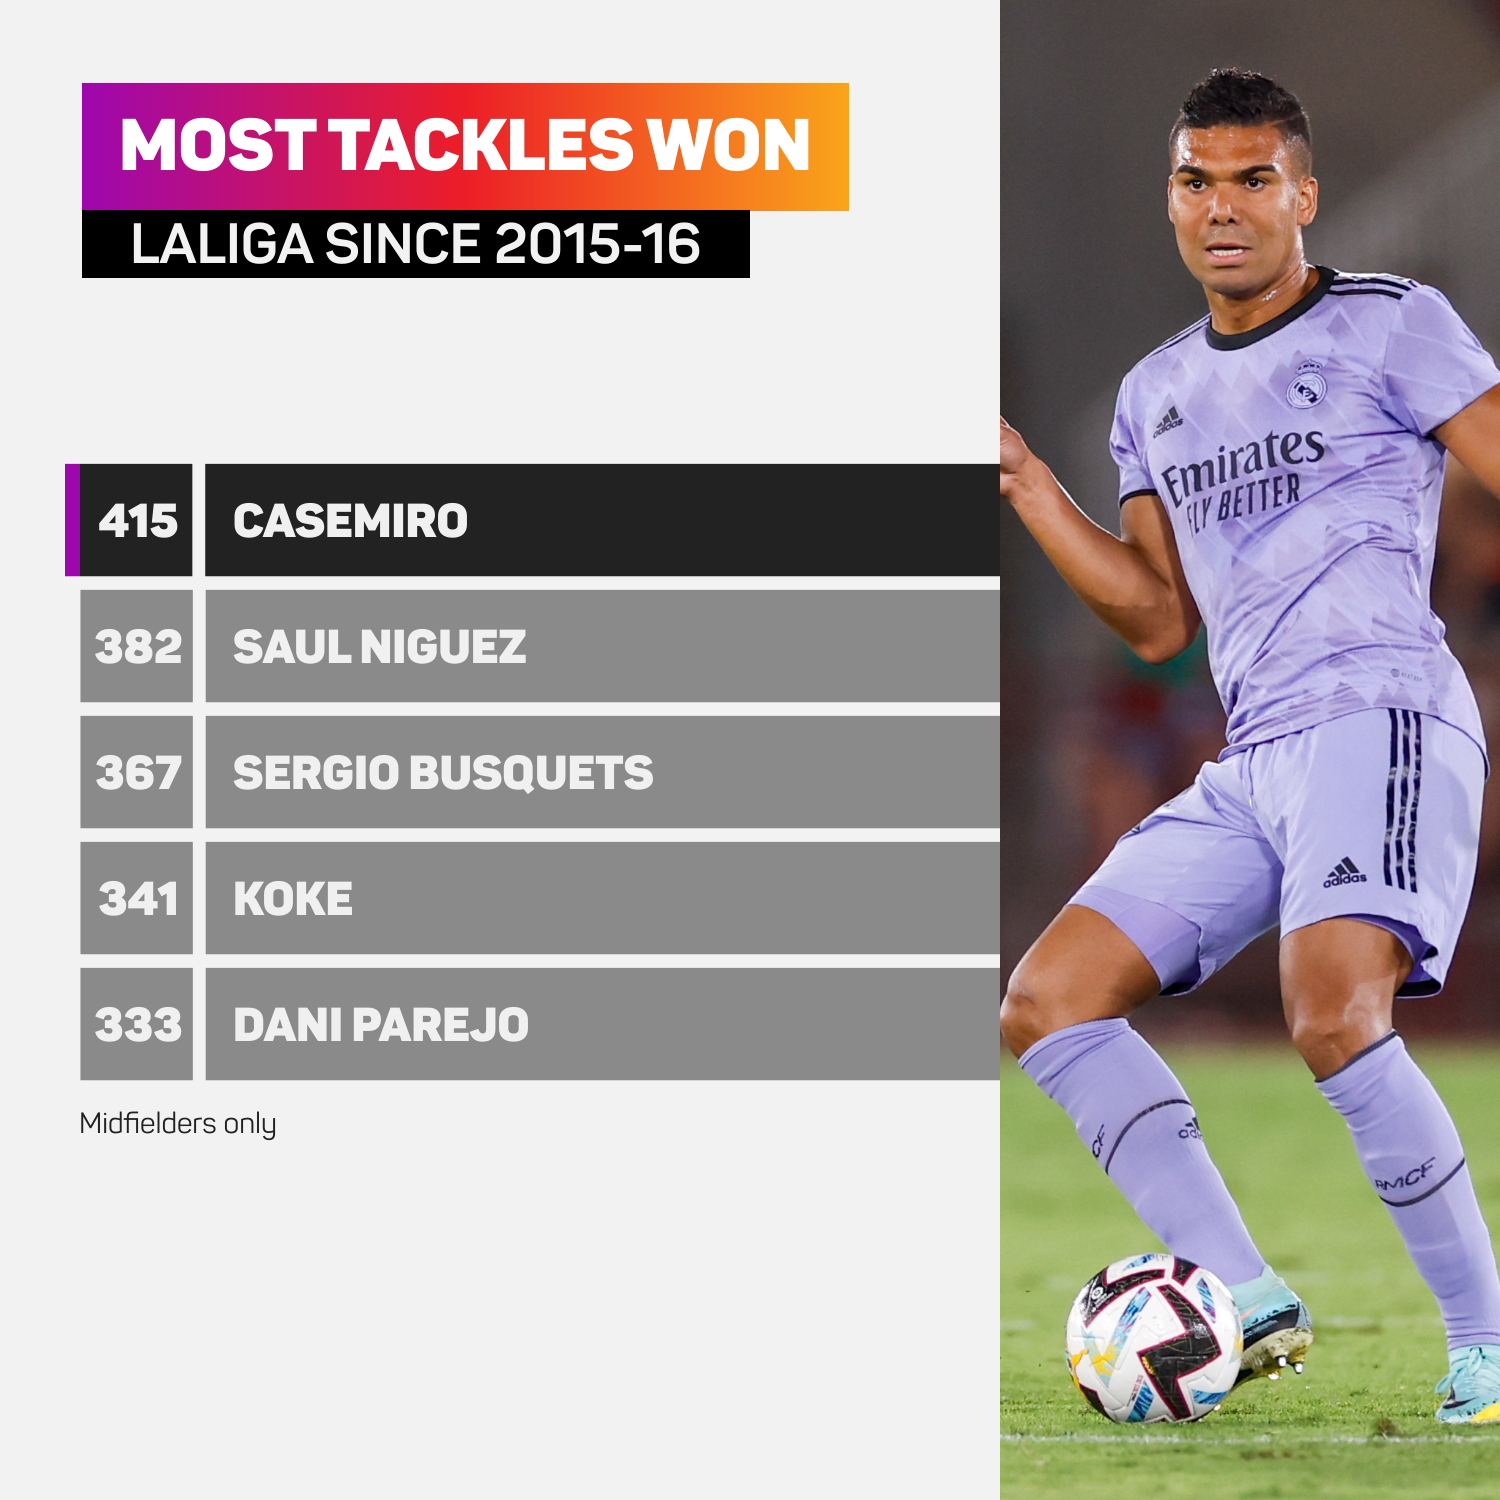 Casemiro most tackles won in LaLiga since 2015-16